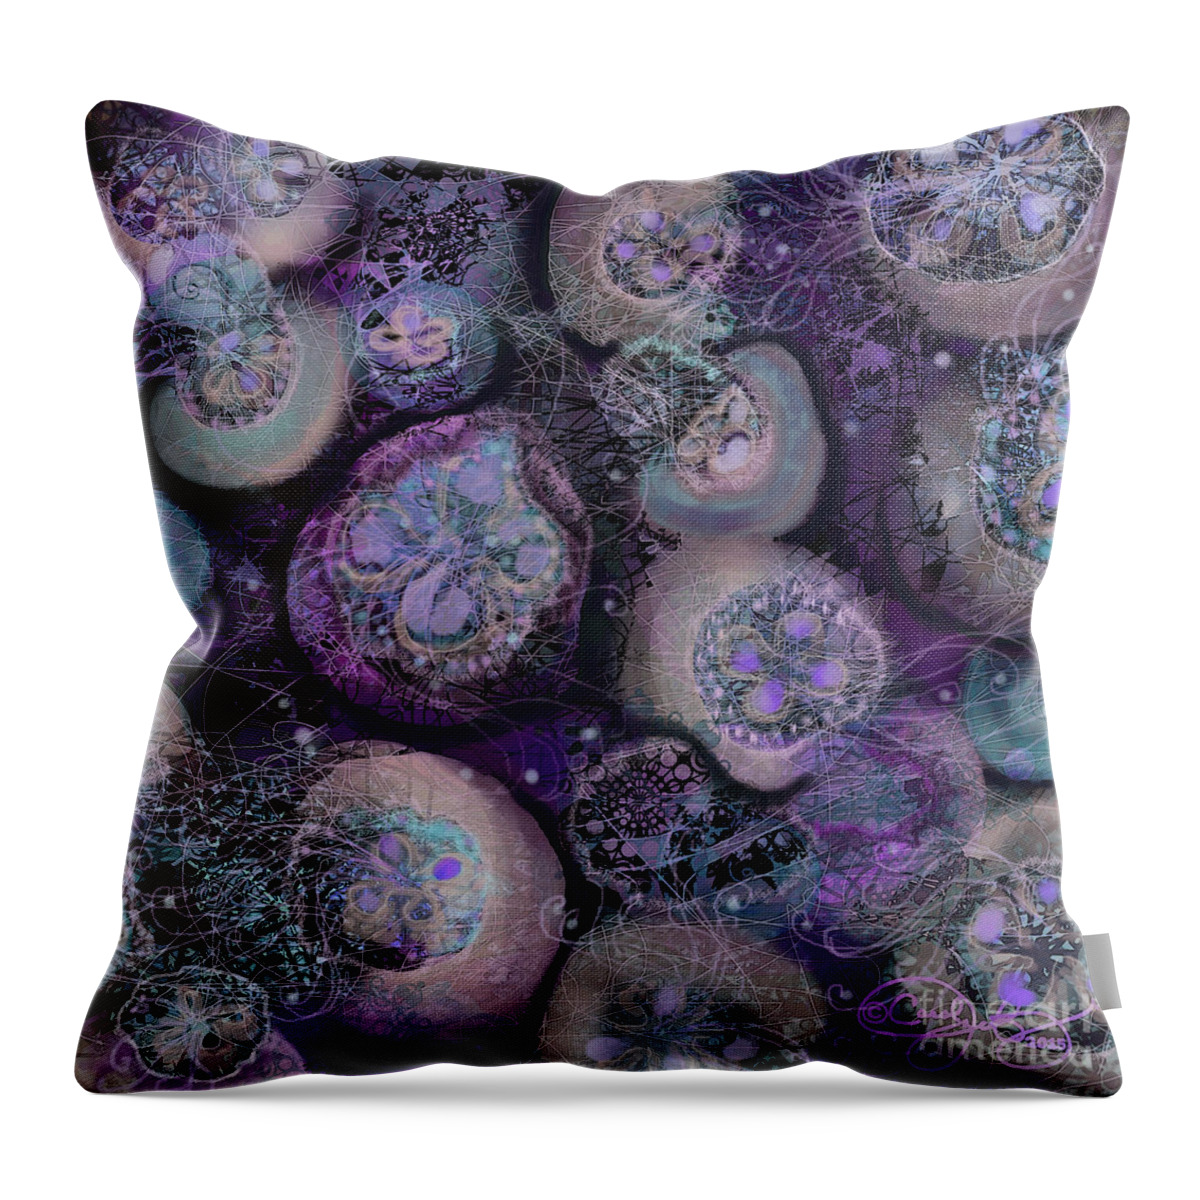 Sea Throw Pillow featuring the digital art Sea Glow by Carol Jacobs